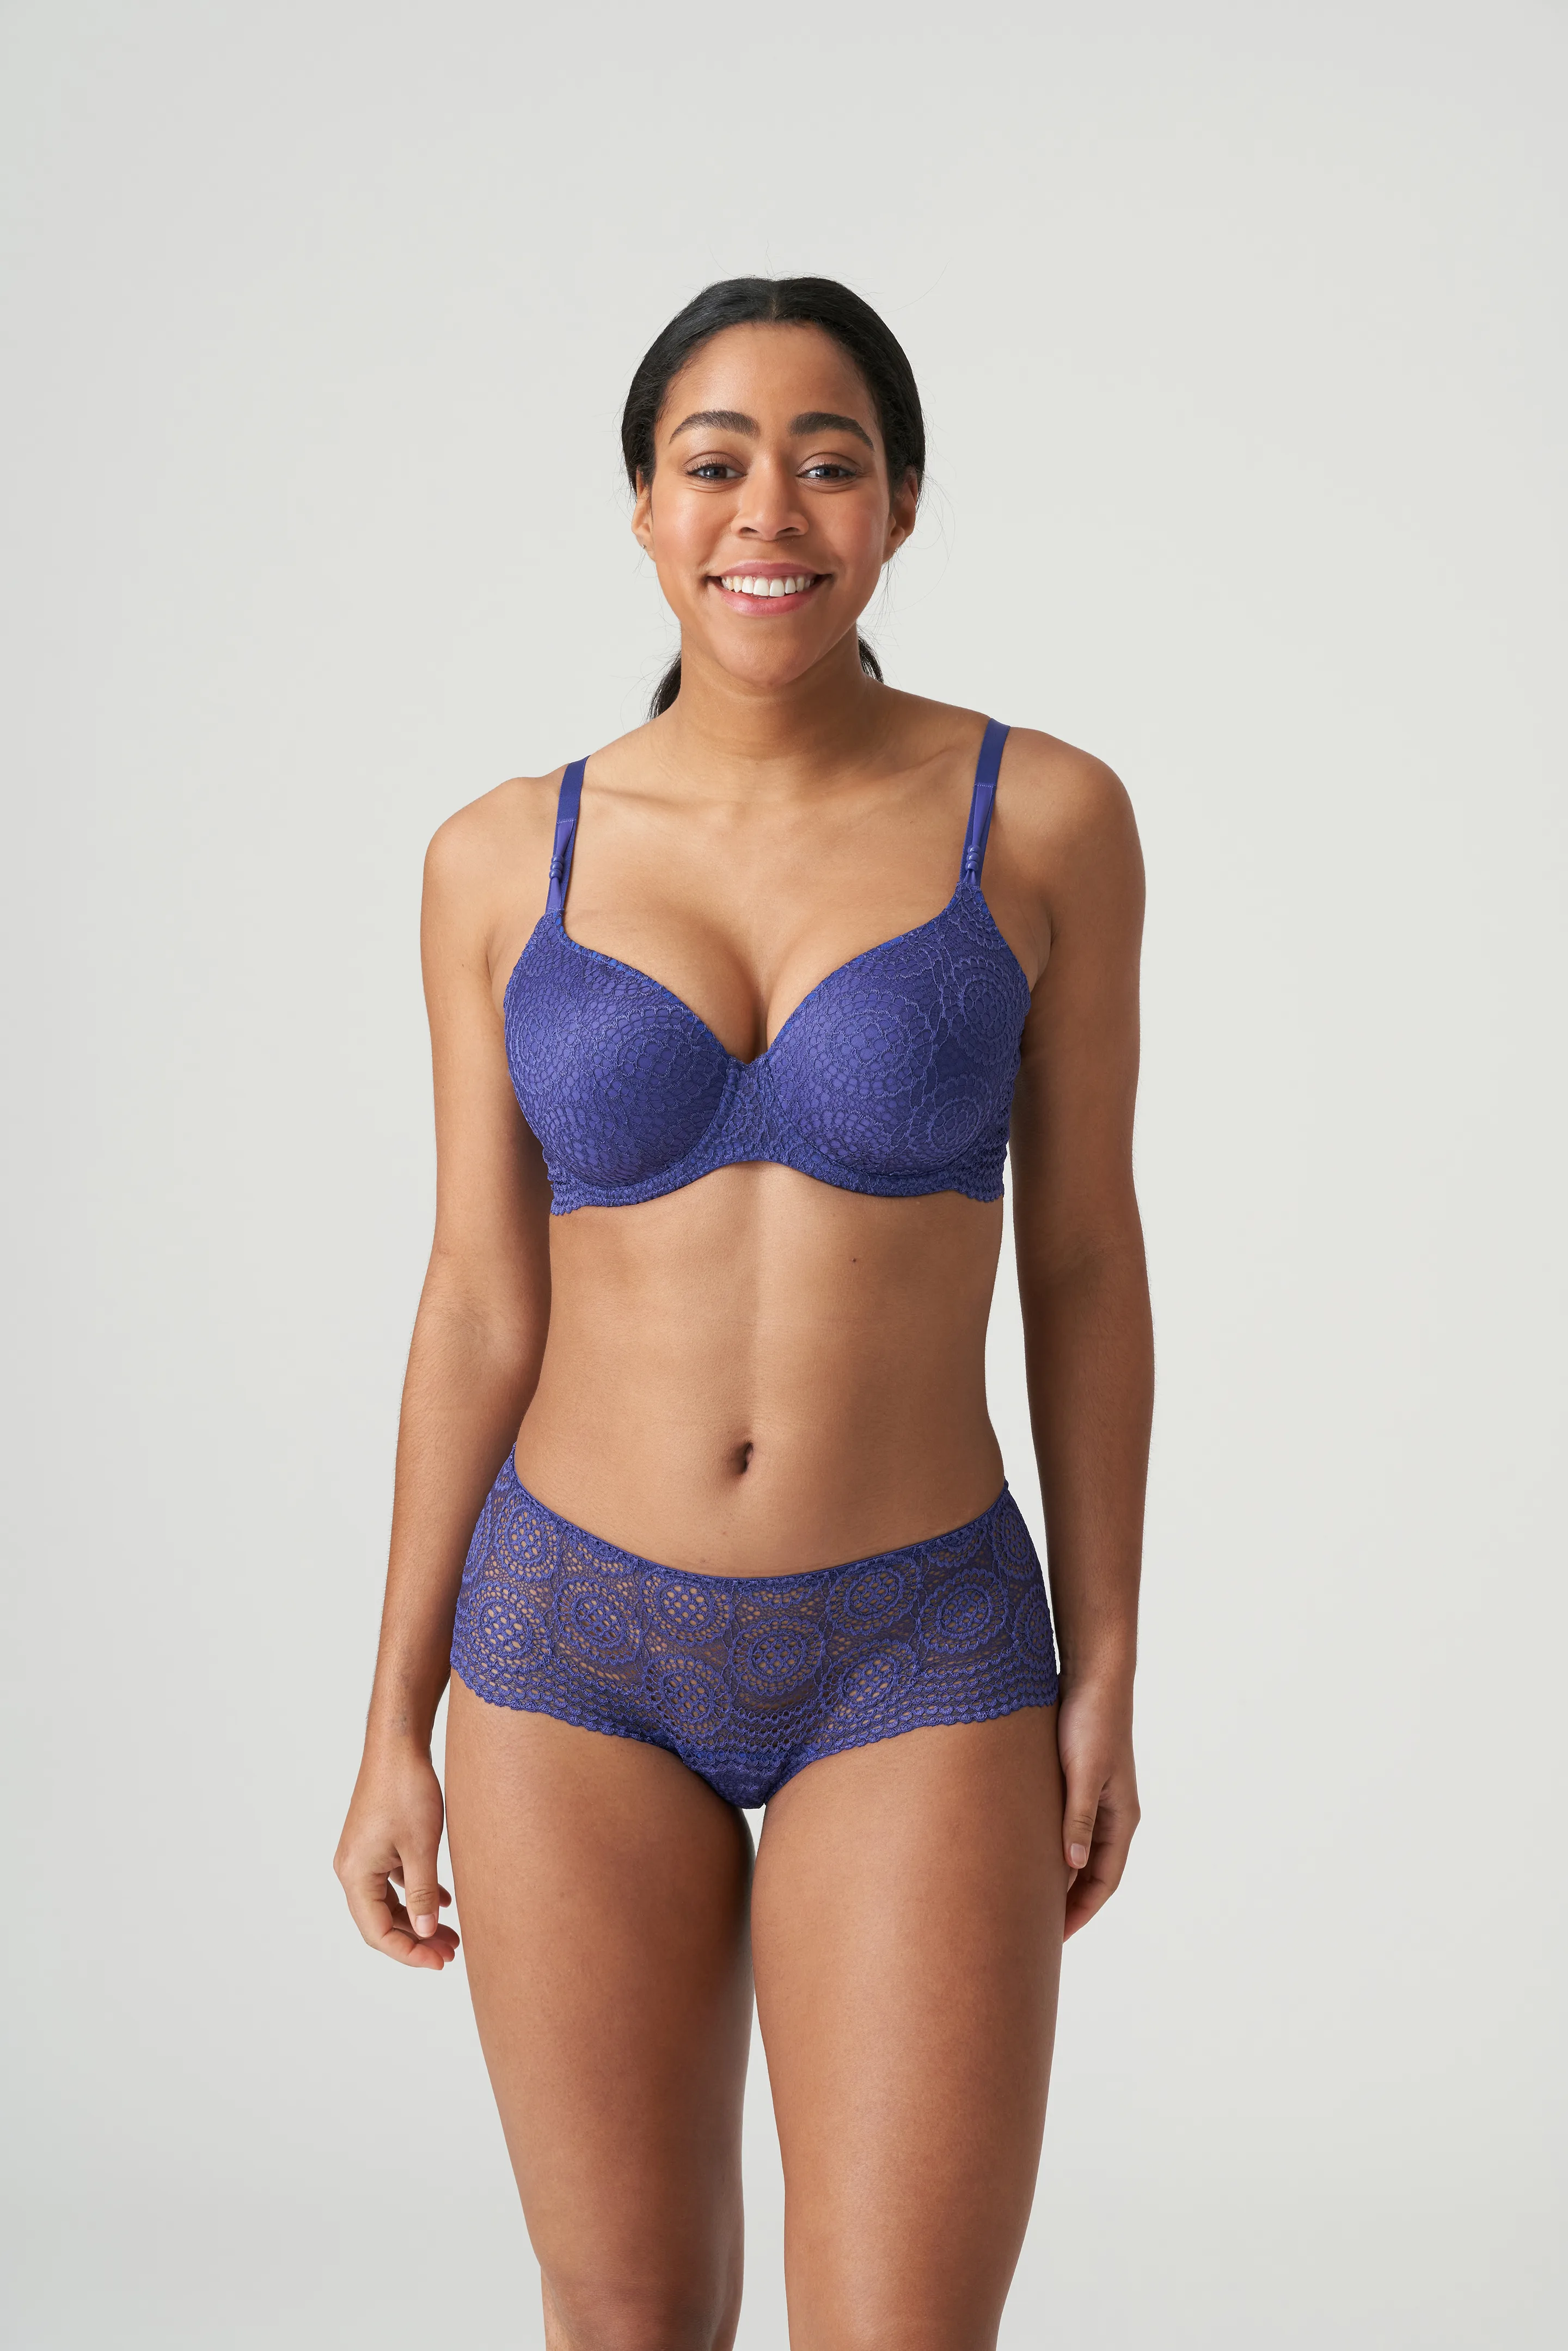 The Perfect Bra Shoppe - Bras, Lingerie and Swimwear: Bras and Breasts